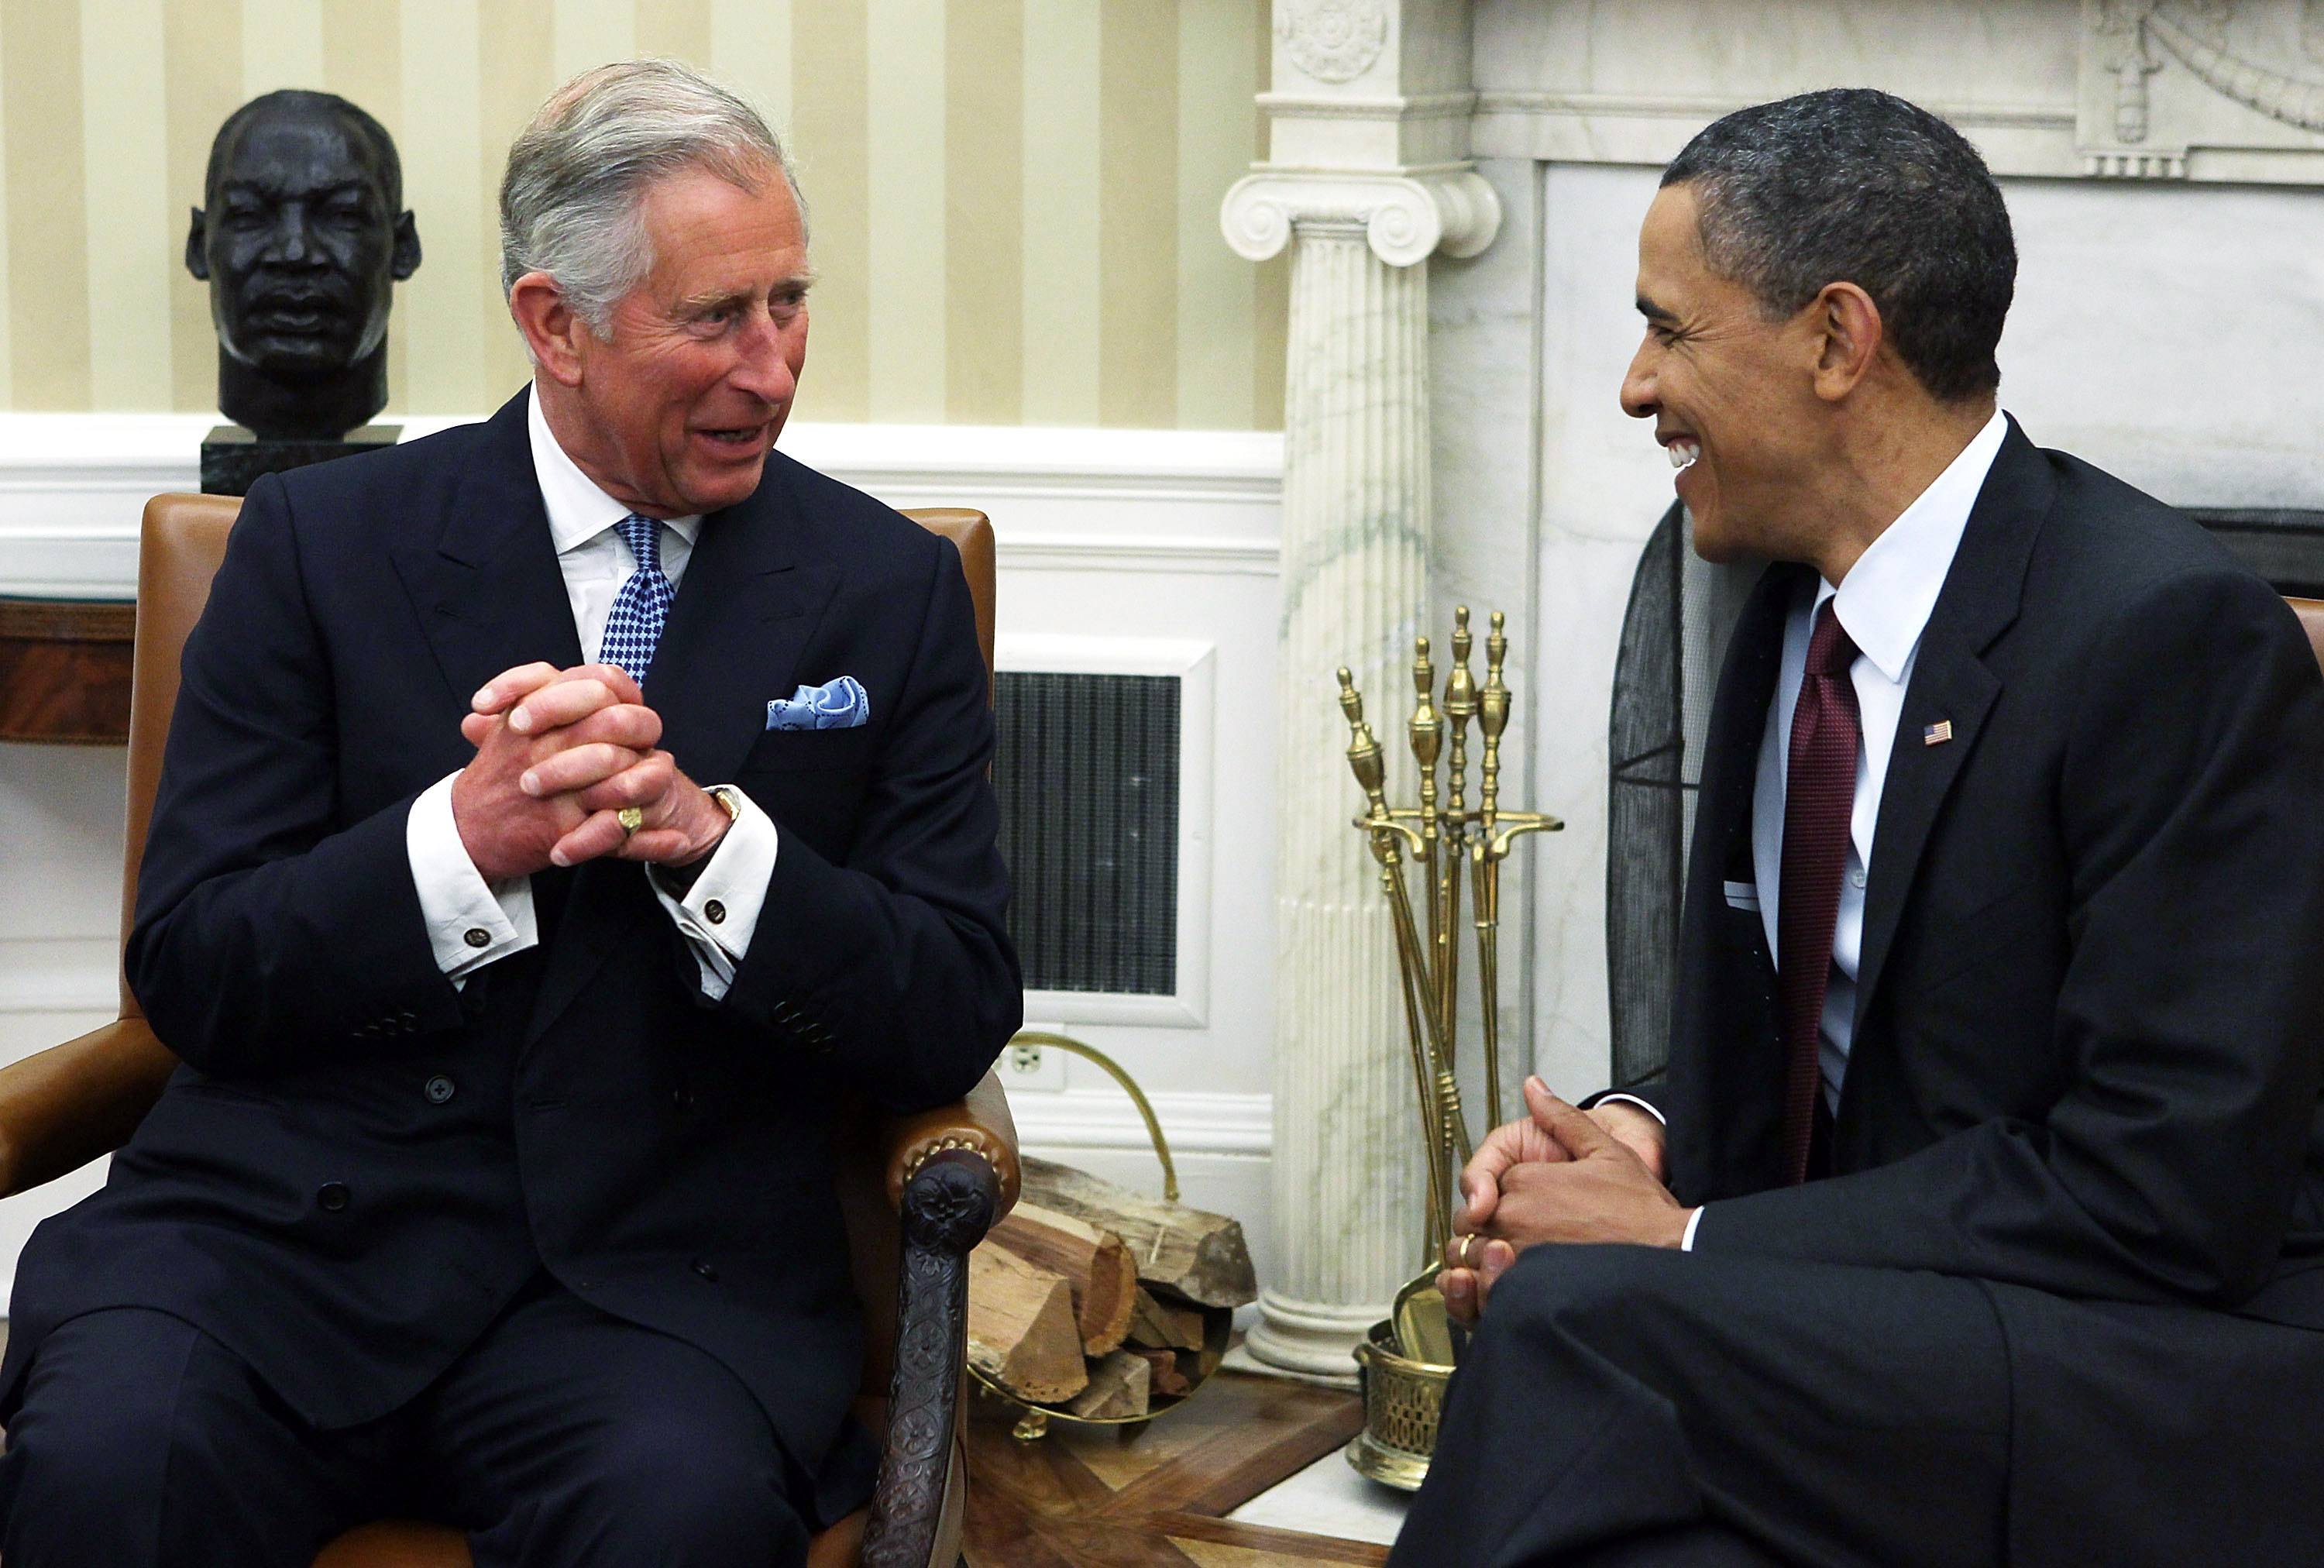 Prince Charles and Barack Obama chat in the White House